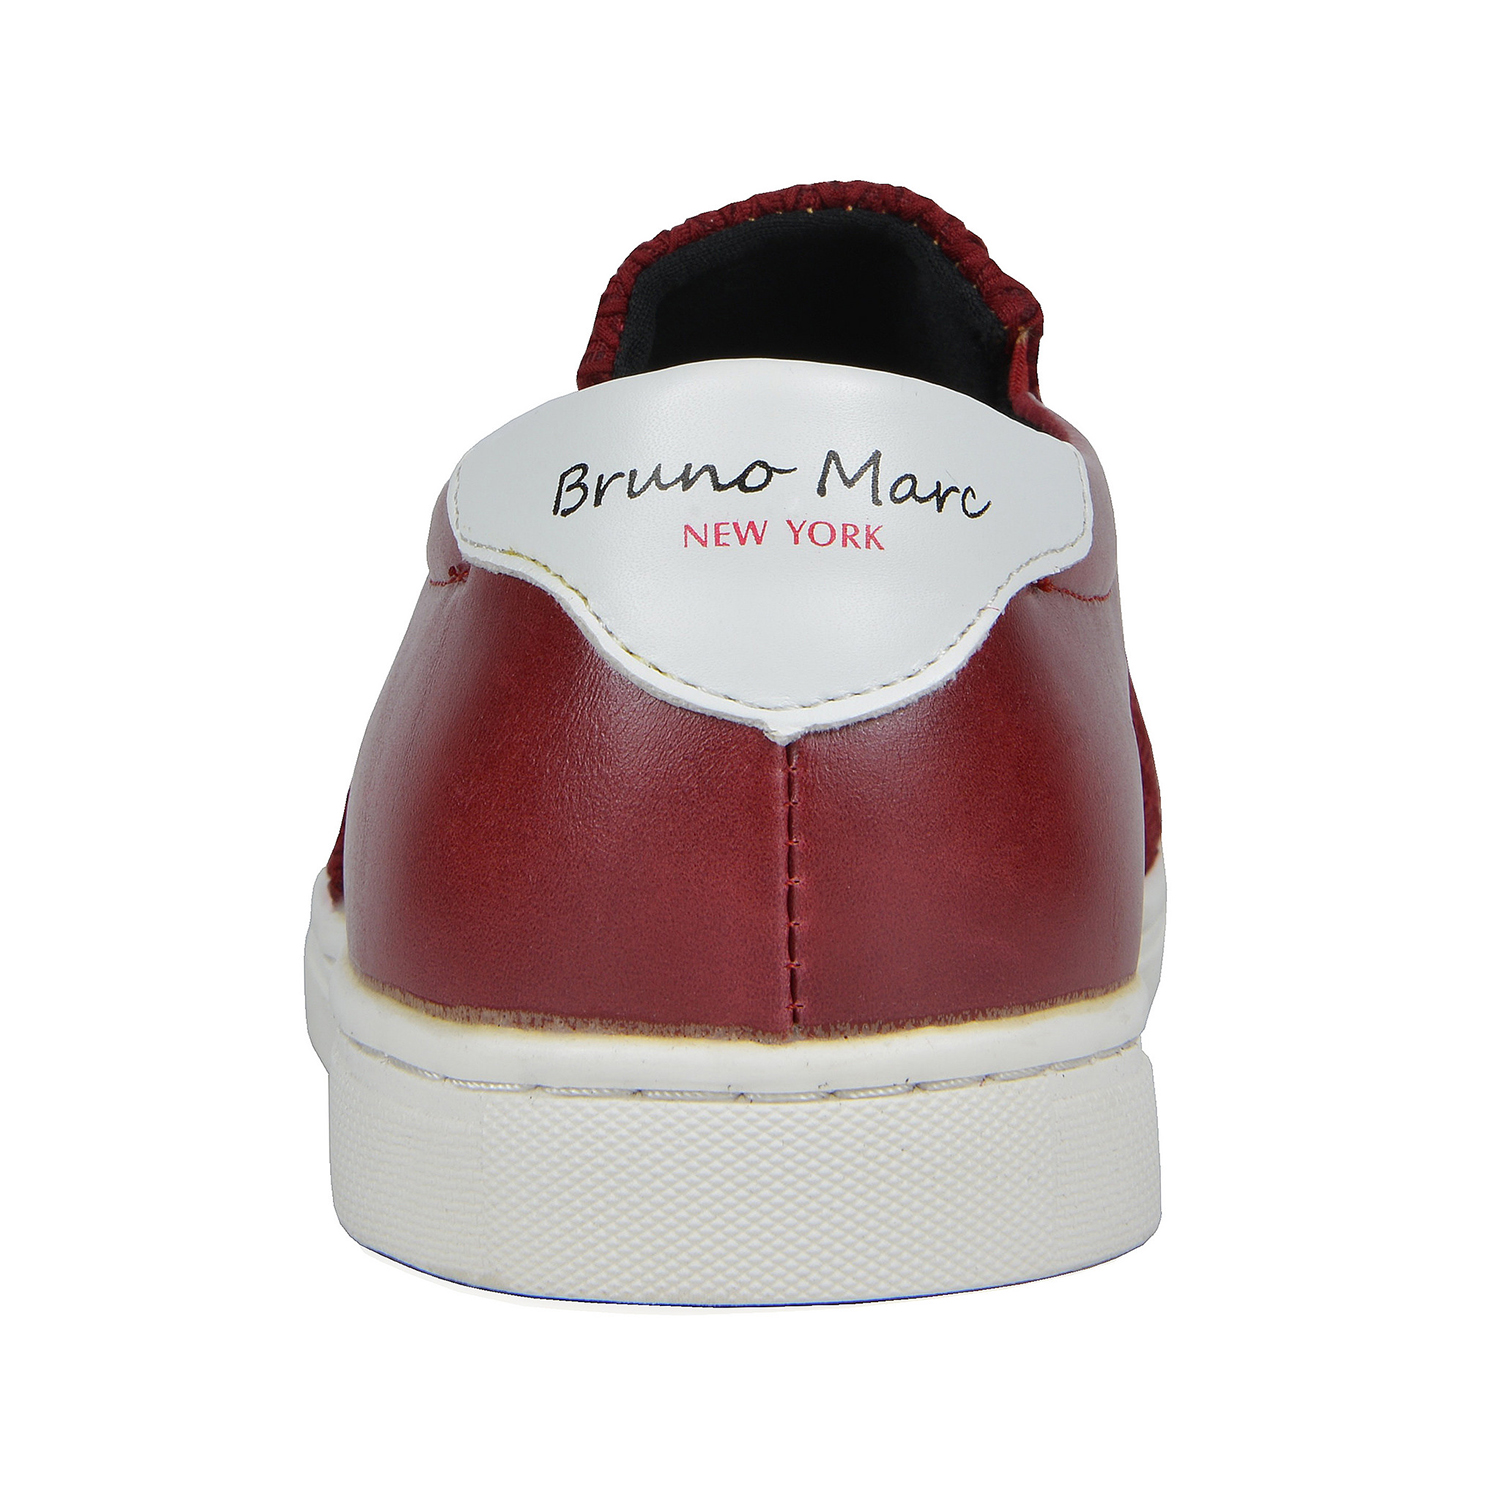 BRUNO MARC Men's Fashion Sneakers Casual Shoes Lace Up Walking Shoes NY-02 RED Size 7.5 - image 4 of 4